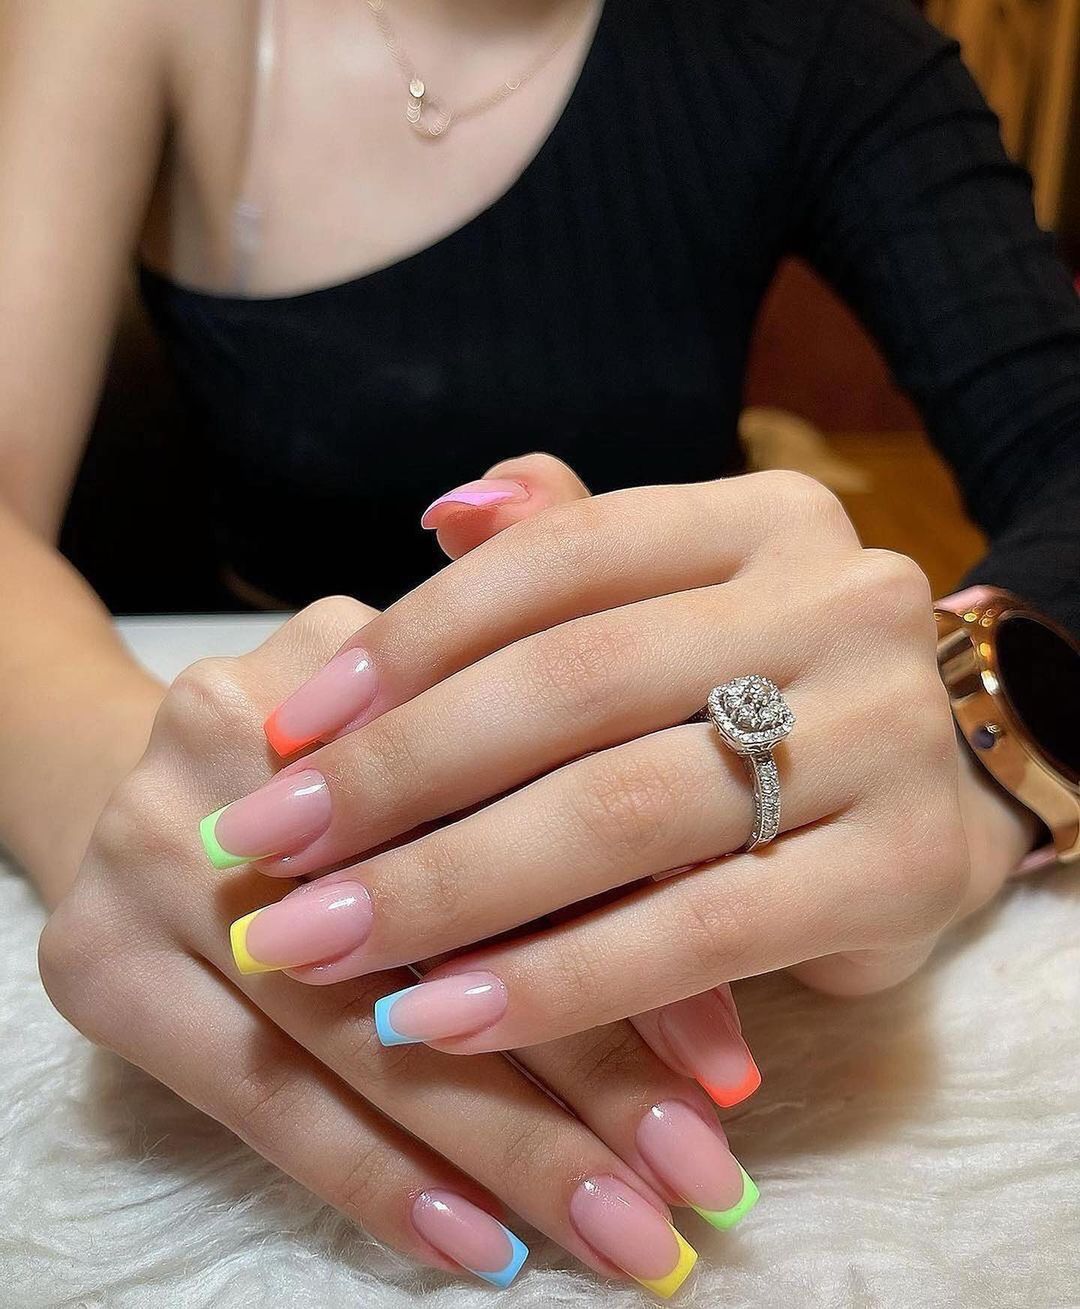 30 Easy Nails & Nail Art Designs To Try In 2022 images 10